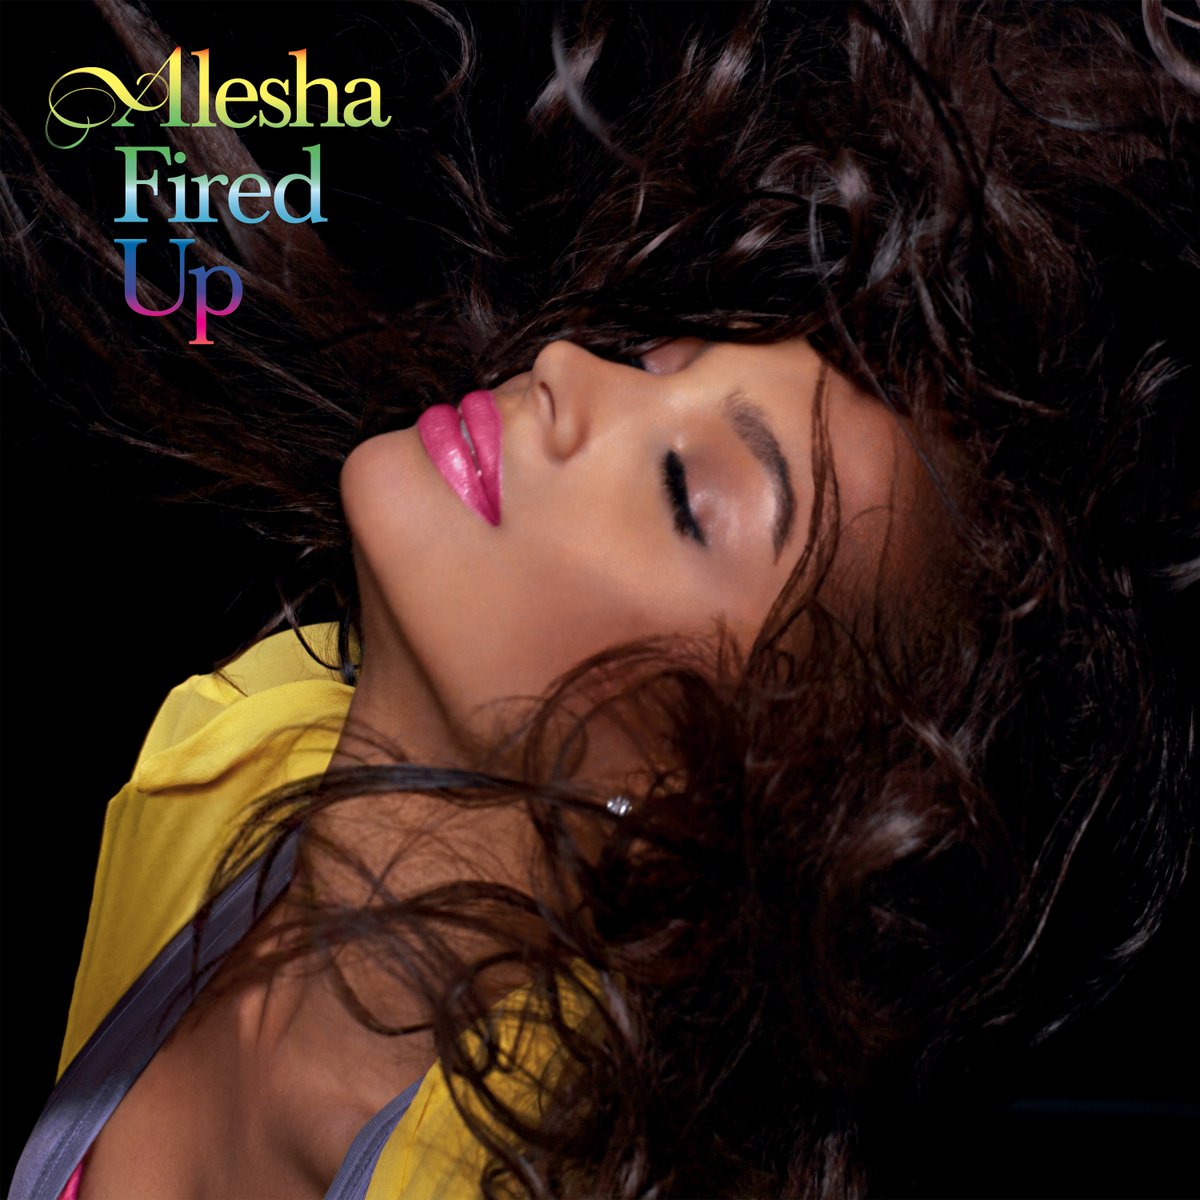 Alesha Dixon's (@AleshaOfficial) debut #FiredUp will soon be available on vinyl for the first time ✨ever✨ Oh, and it's gonna be PINK 💗😍 Check out the full list of releases for Record Store Day UK (@RSDUK)'s Black Friday drop: officialcharts.com/chart-news/rec… #RSDBF